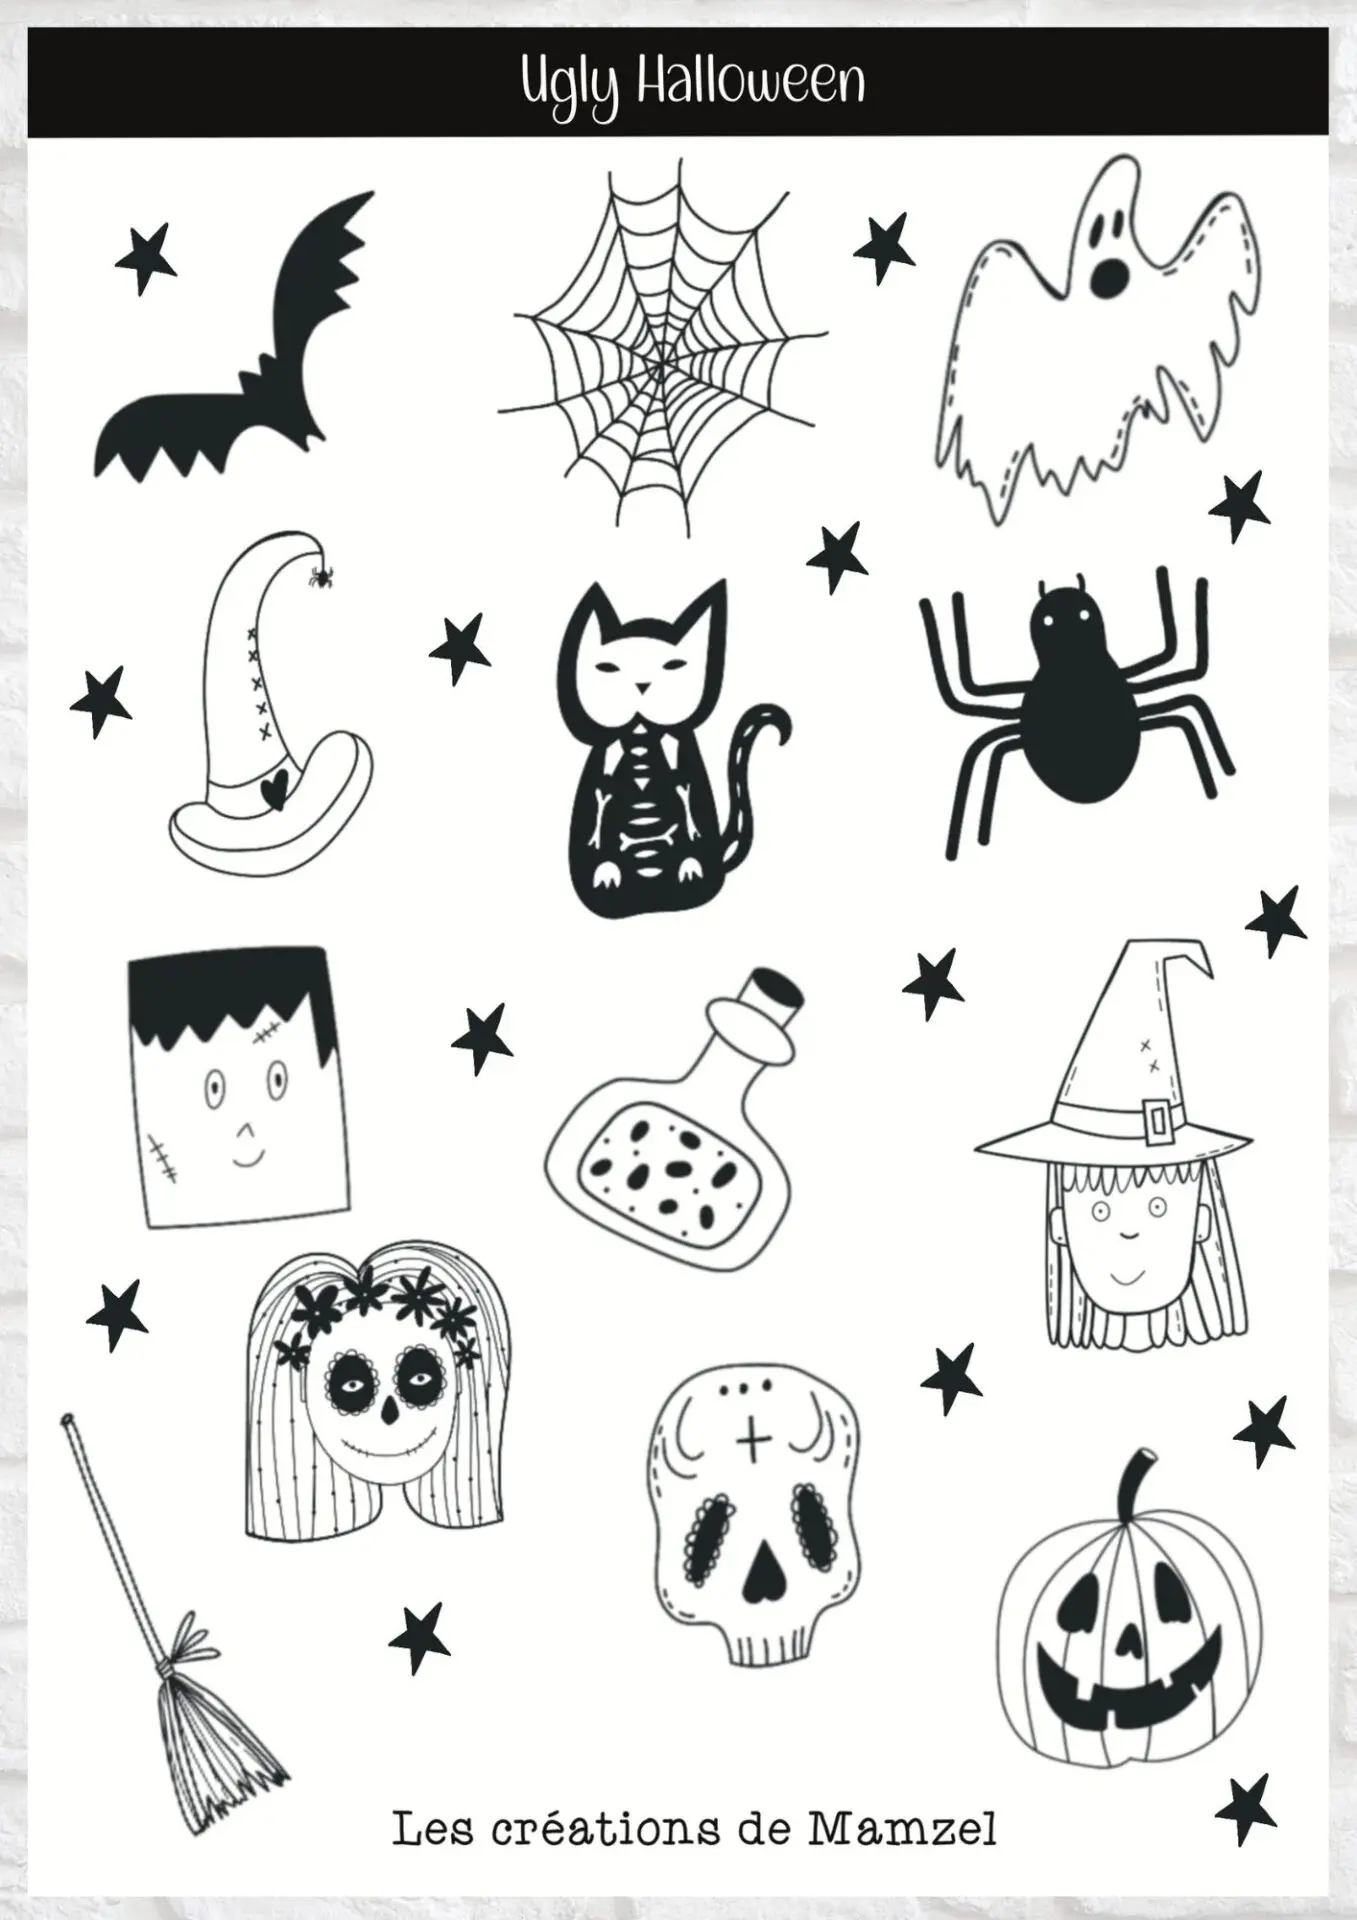 Gommettes - Halloween - 2 planches